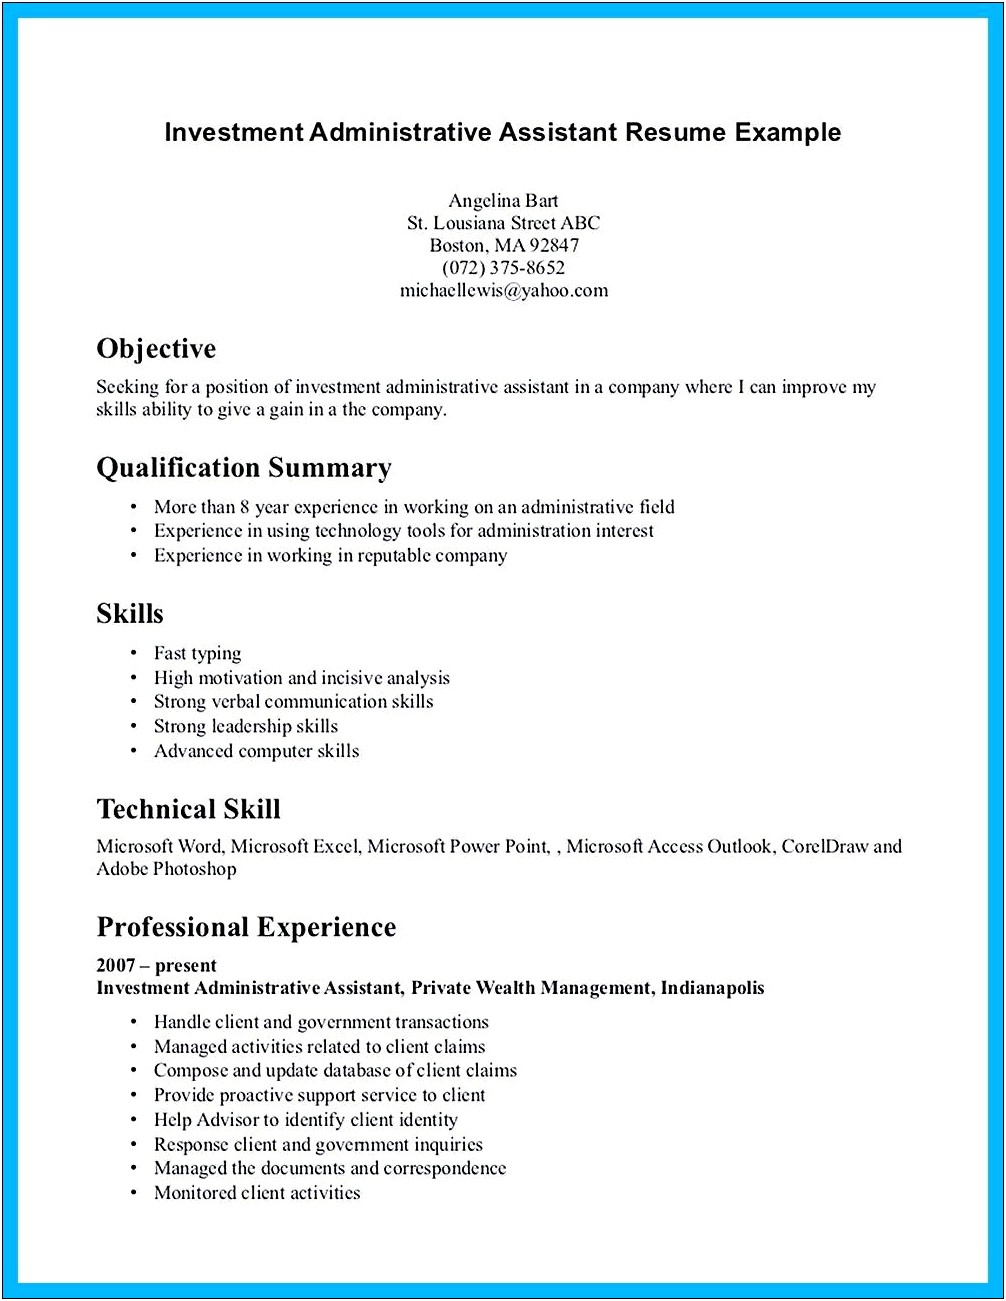 Resume Objective For Entry Level Administrative Assistant